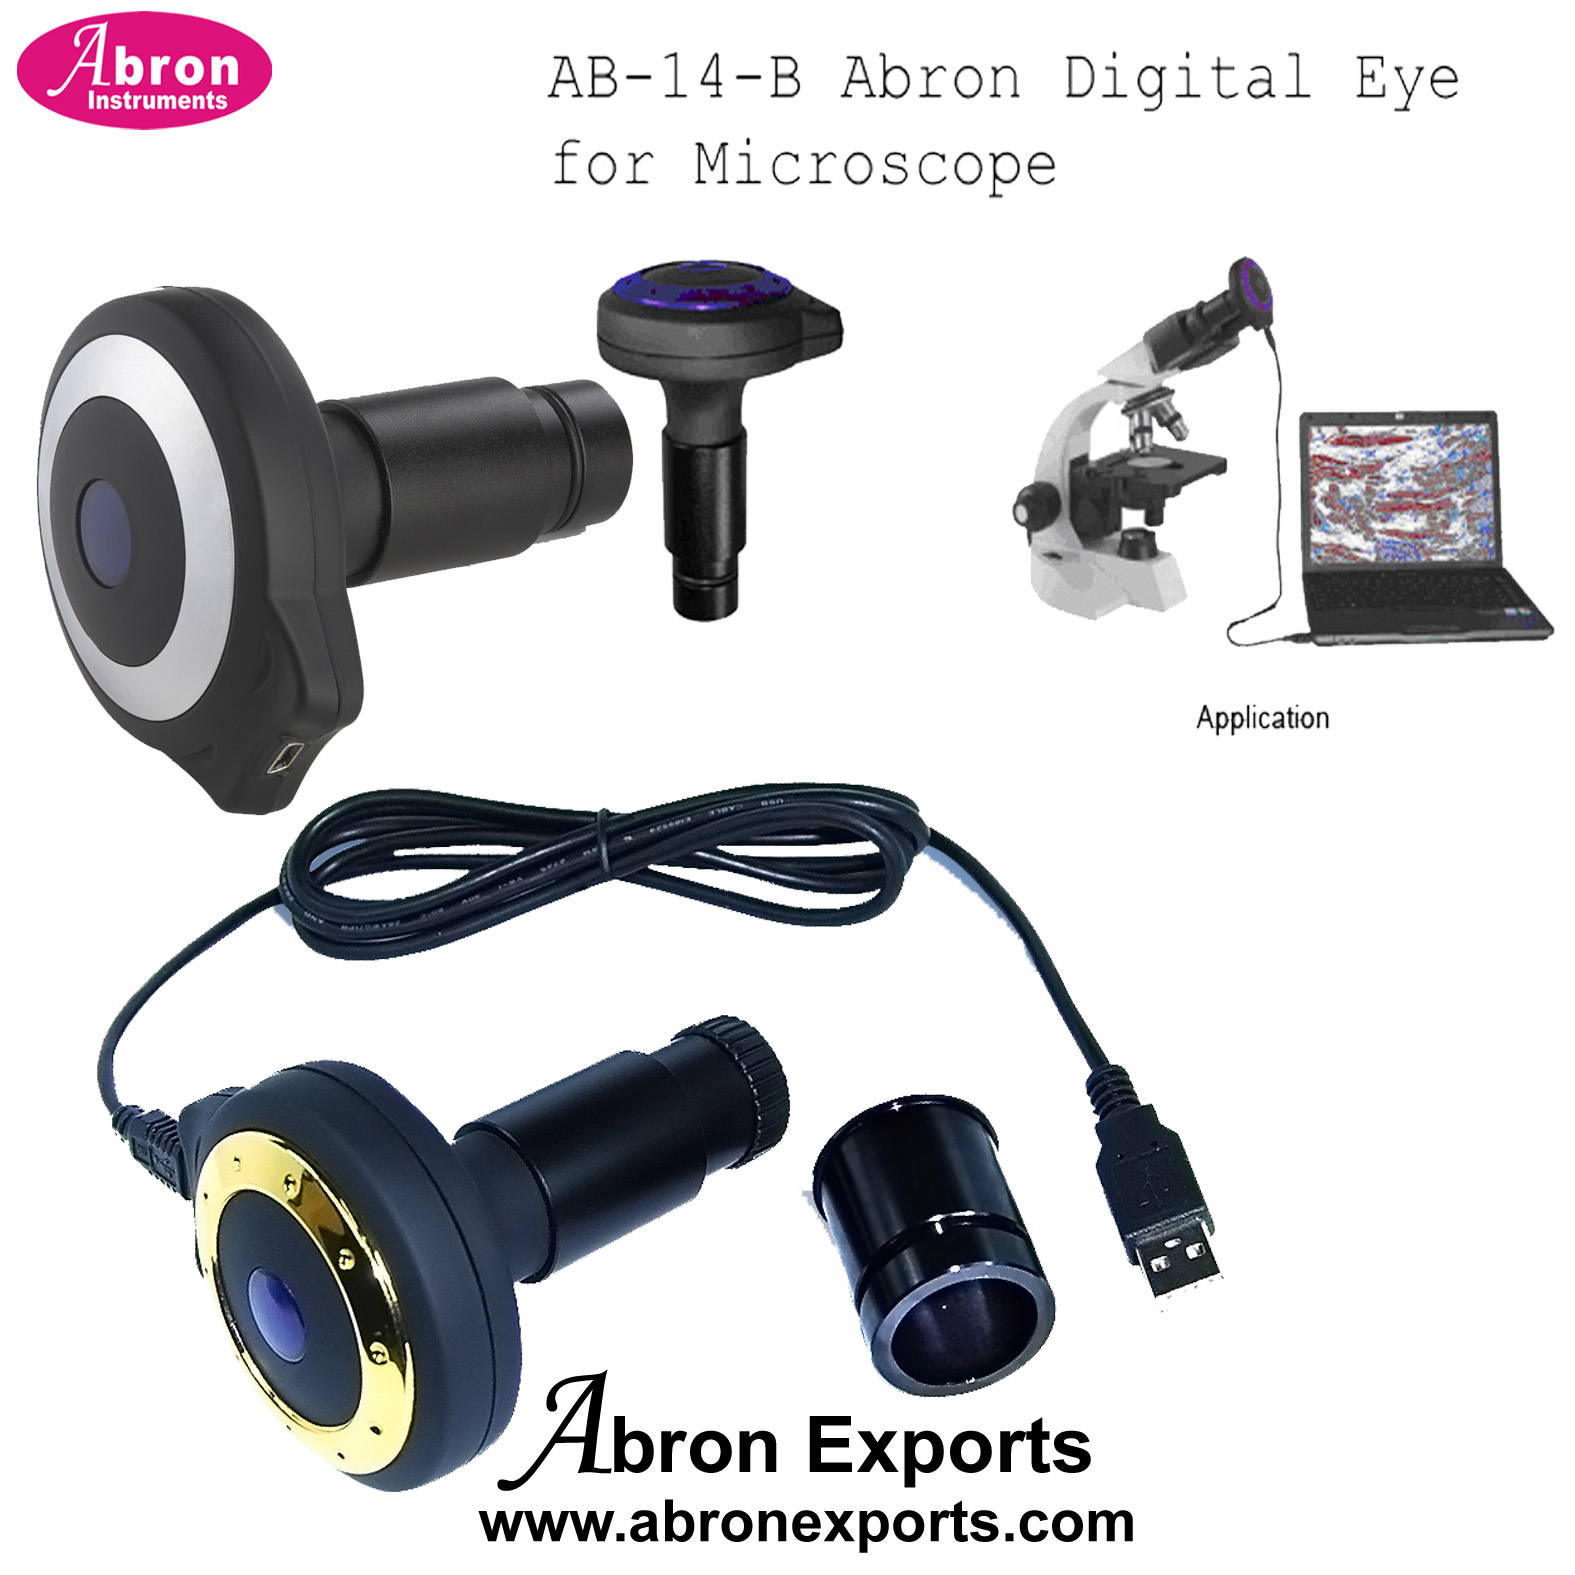 Brewesters Angle Digital Camera Eye 5MP For Laptop Spectrometer Study Abron AE-1215E5 